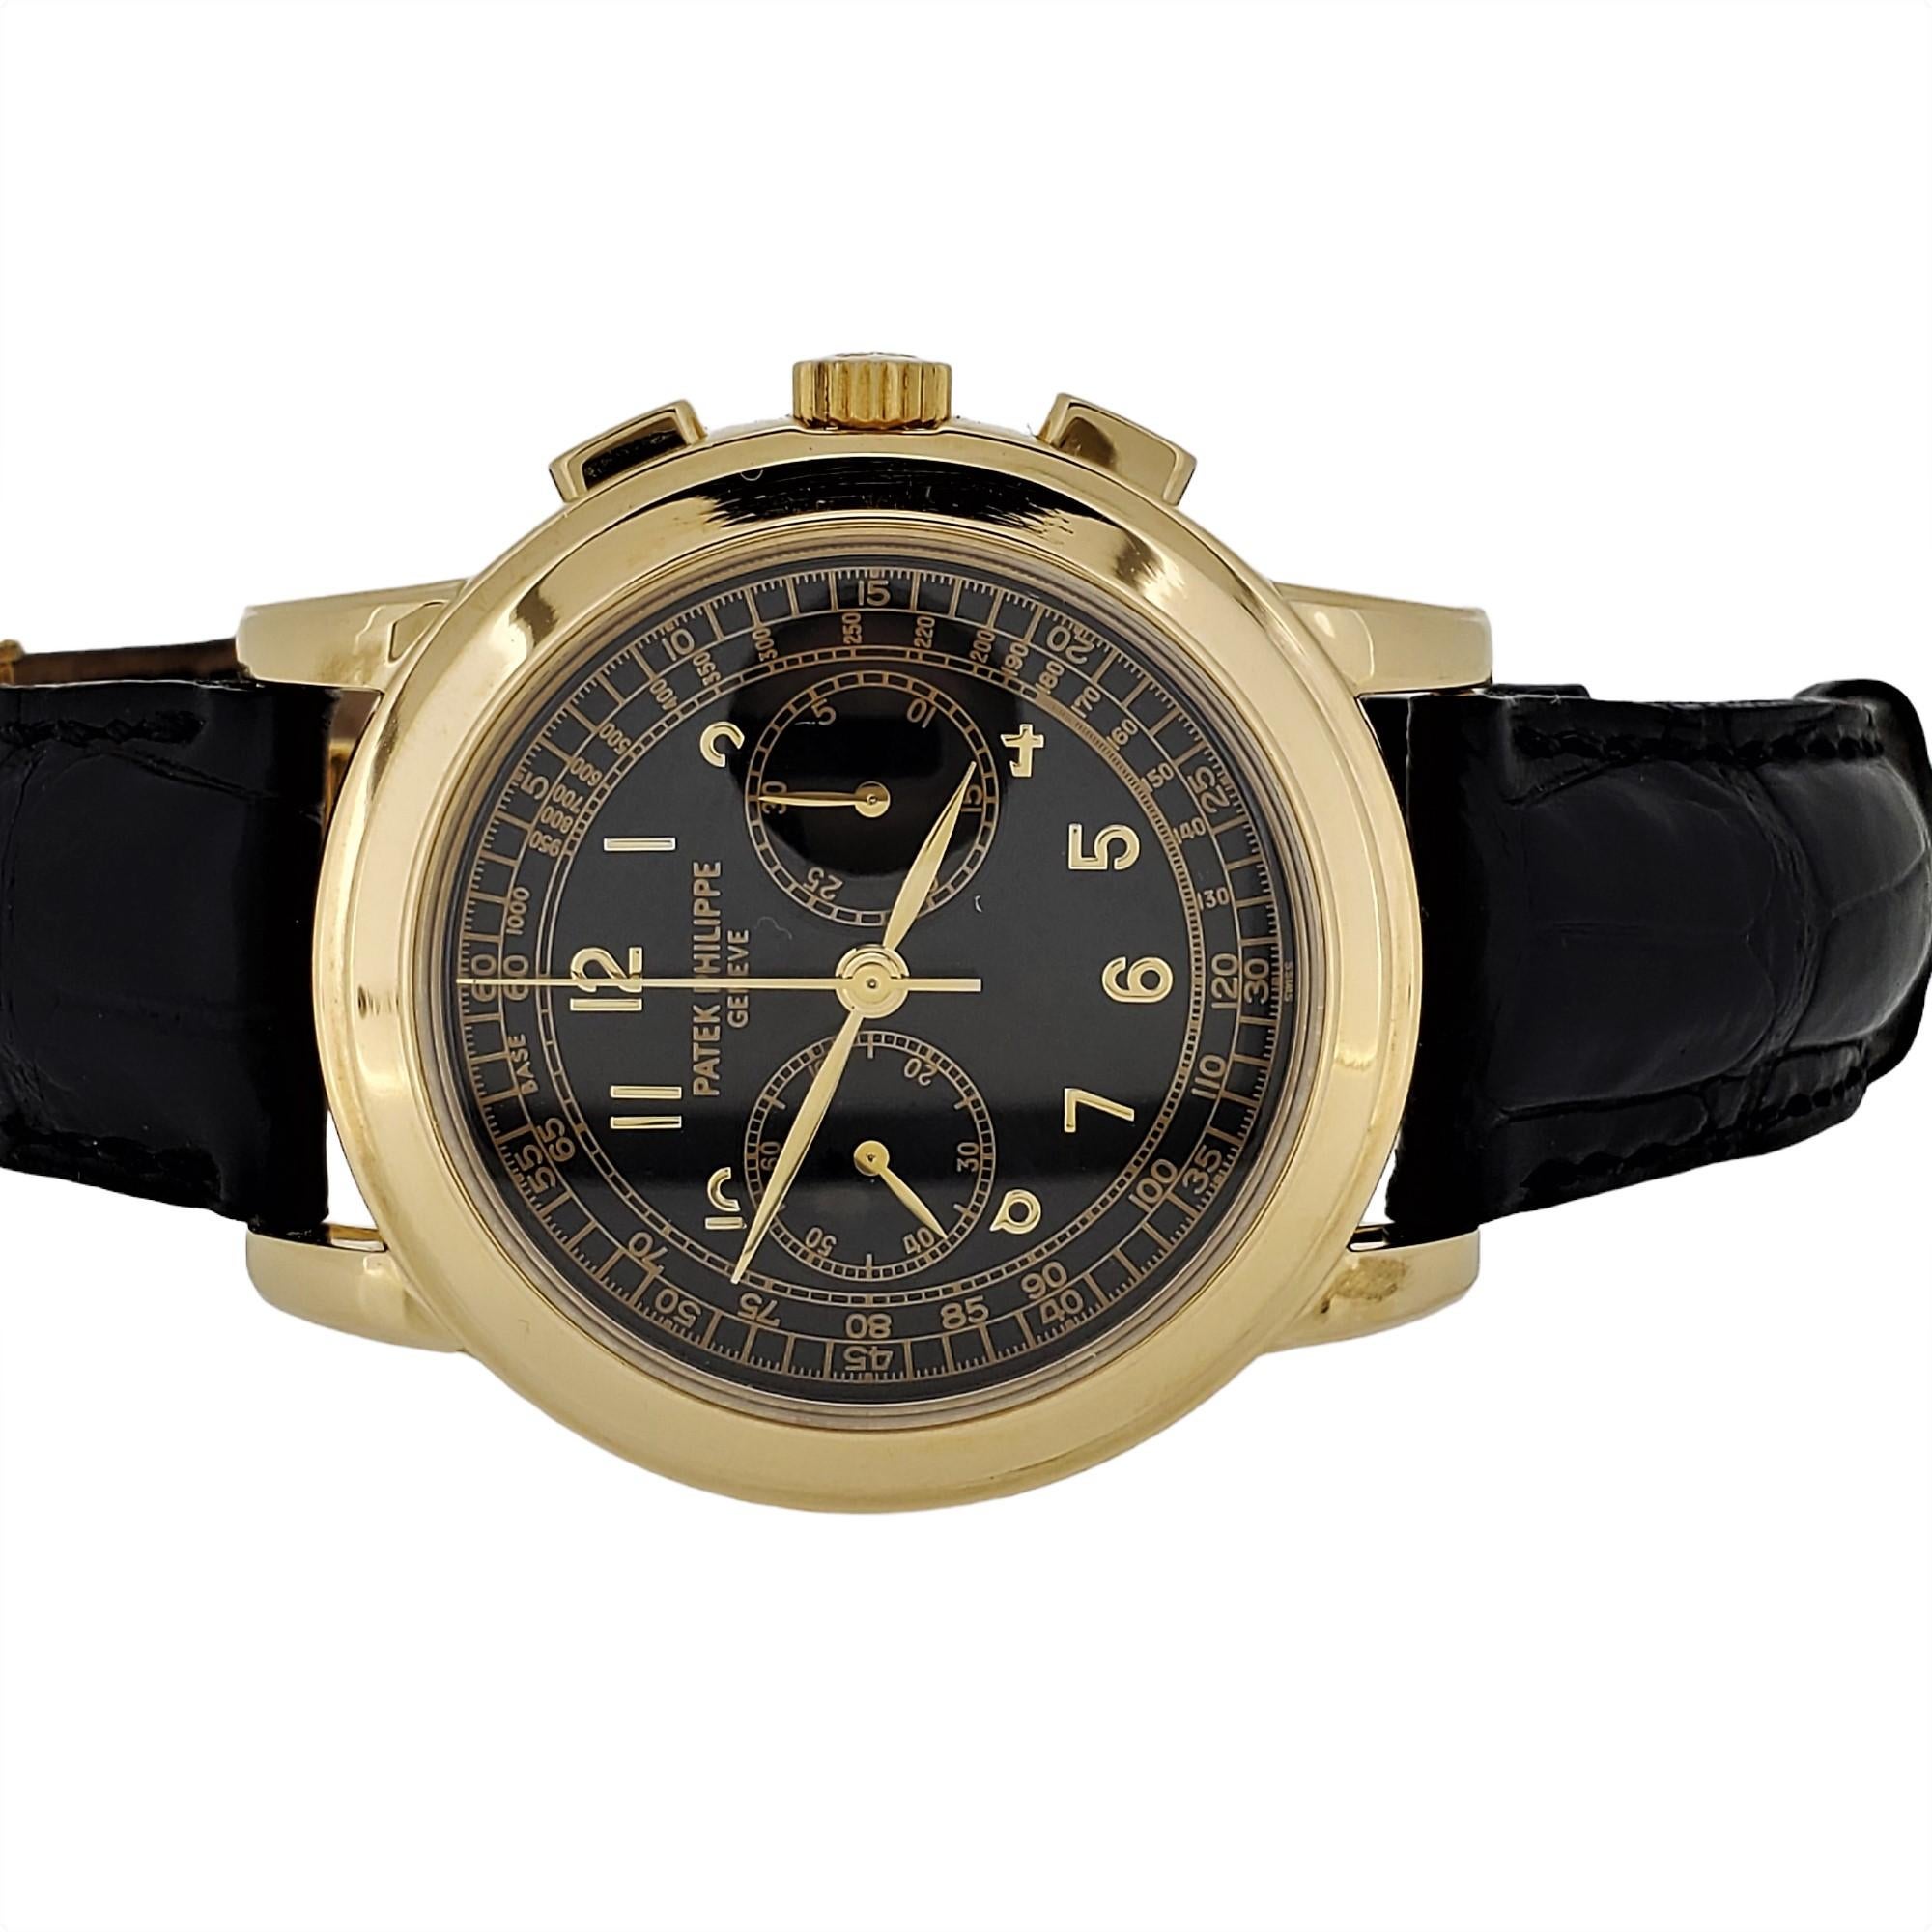 Patek Philippe 5070J Chronograph Watch Yellow gold 42 mm Case Circa 2000 For Sale 2